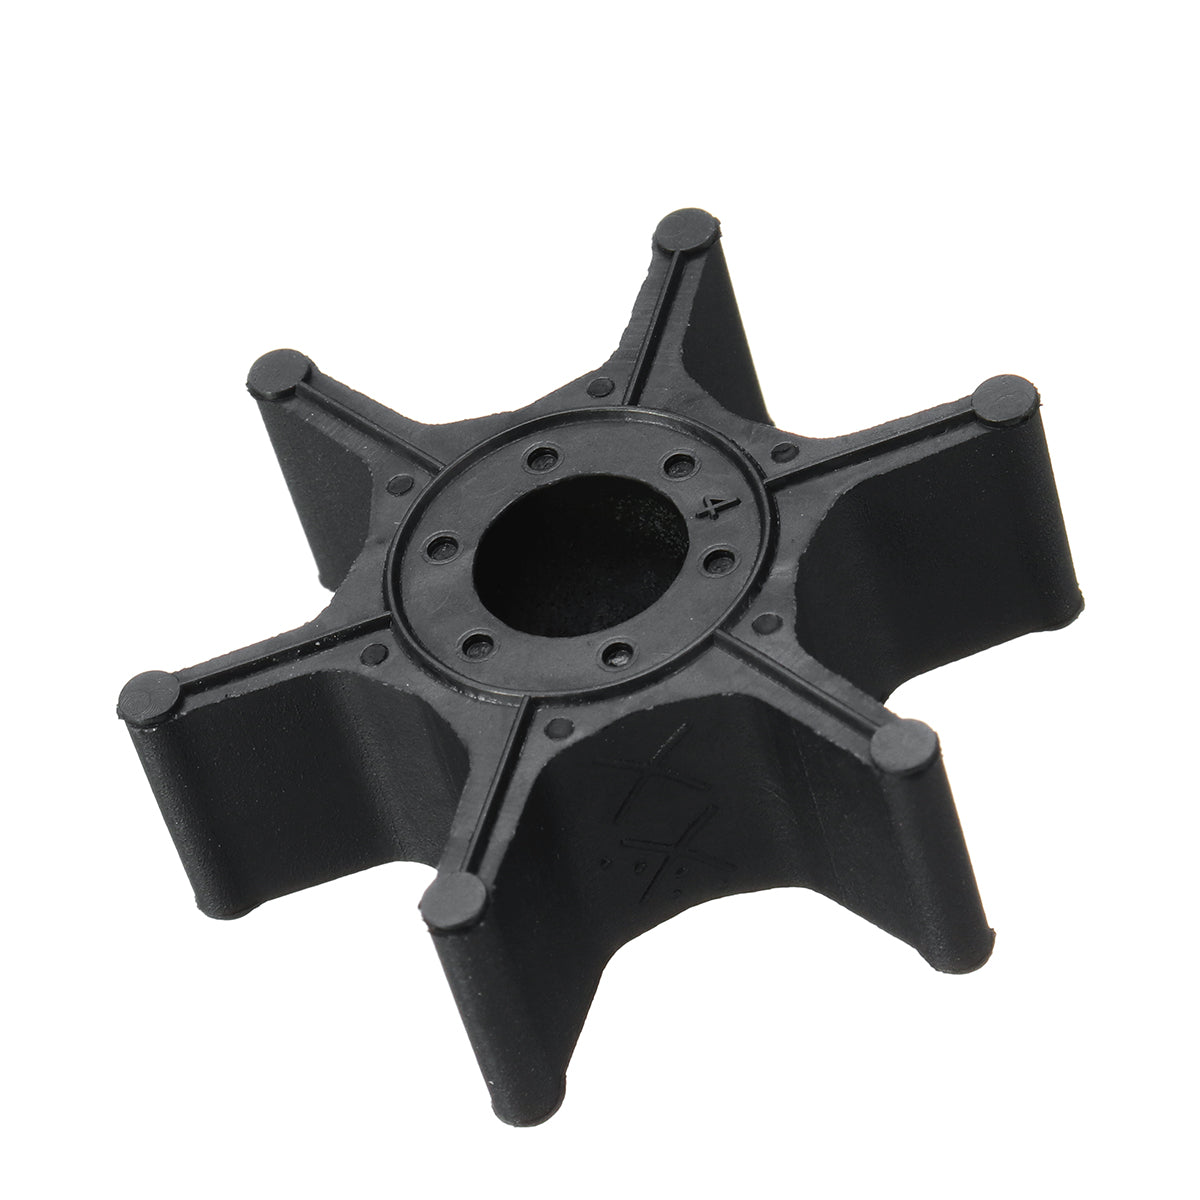 Dim Gray Water Pump Impeller For Suzuki Boat Outboard Engine 2-8HP 2/4-Stroke 17461-98501